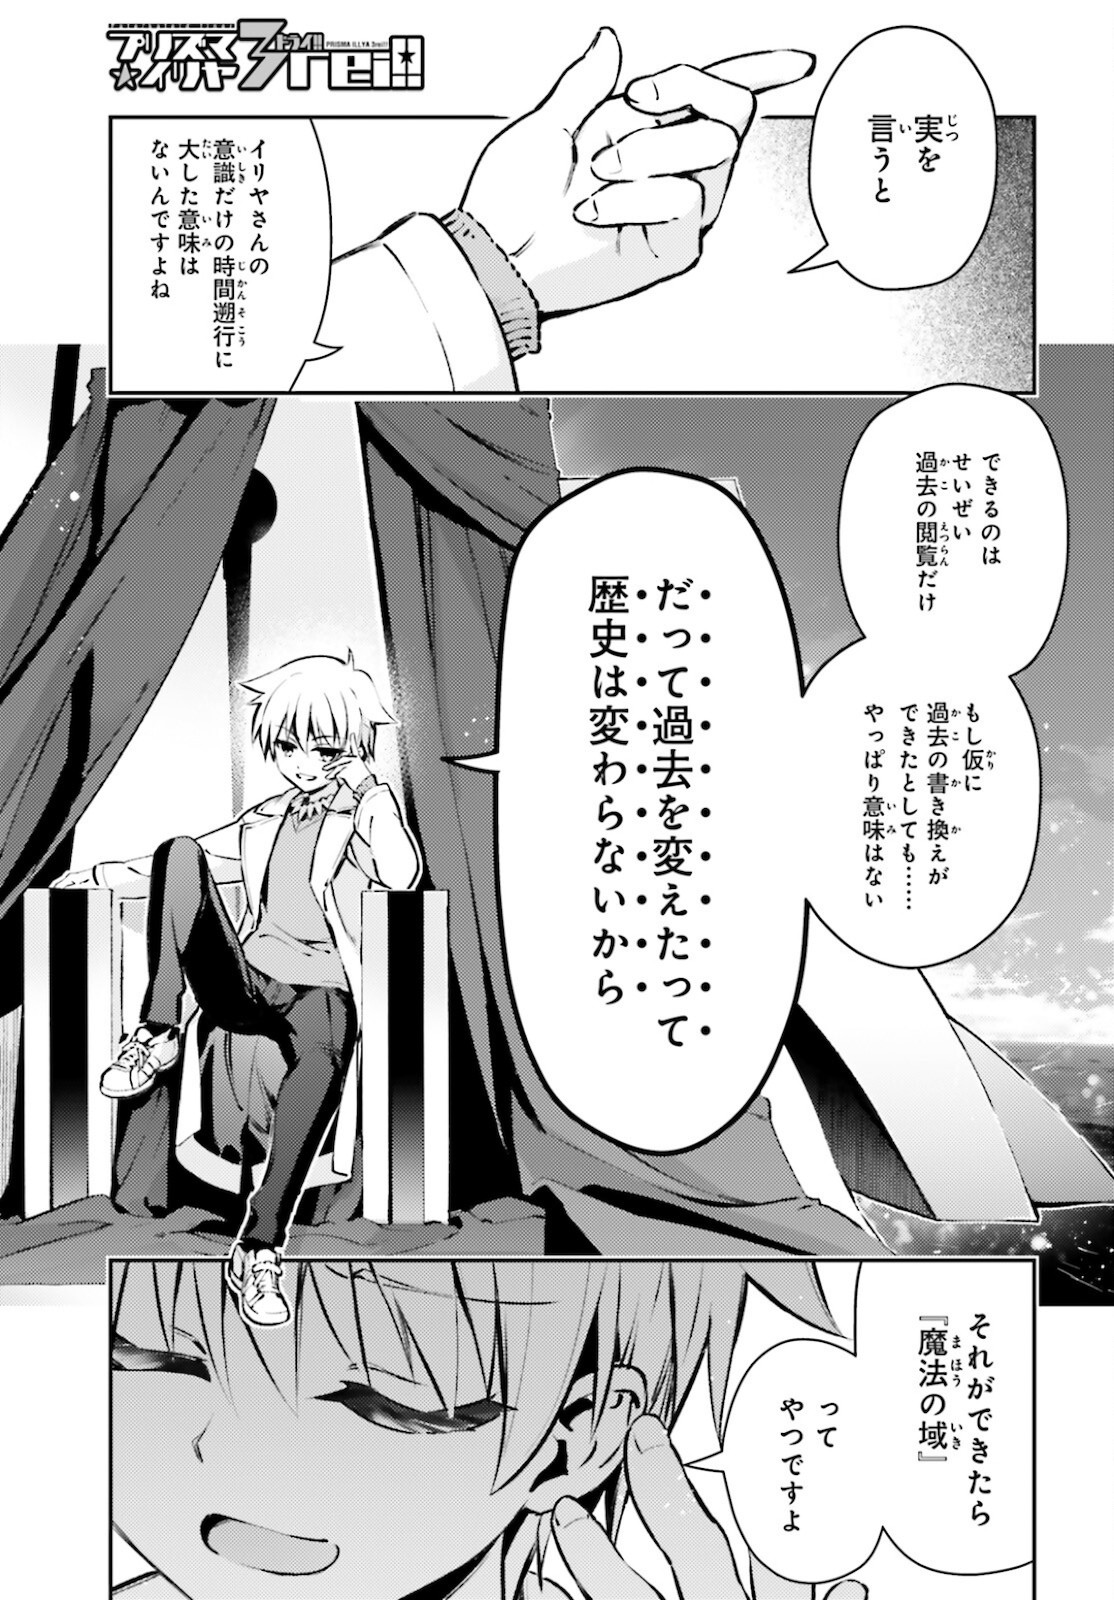 Fate/Kaleid Liner Prisma Illya Drei! - Chapter 66-1 - Page 1